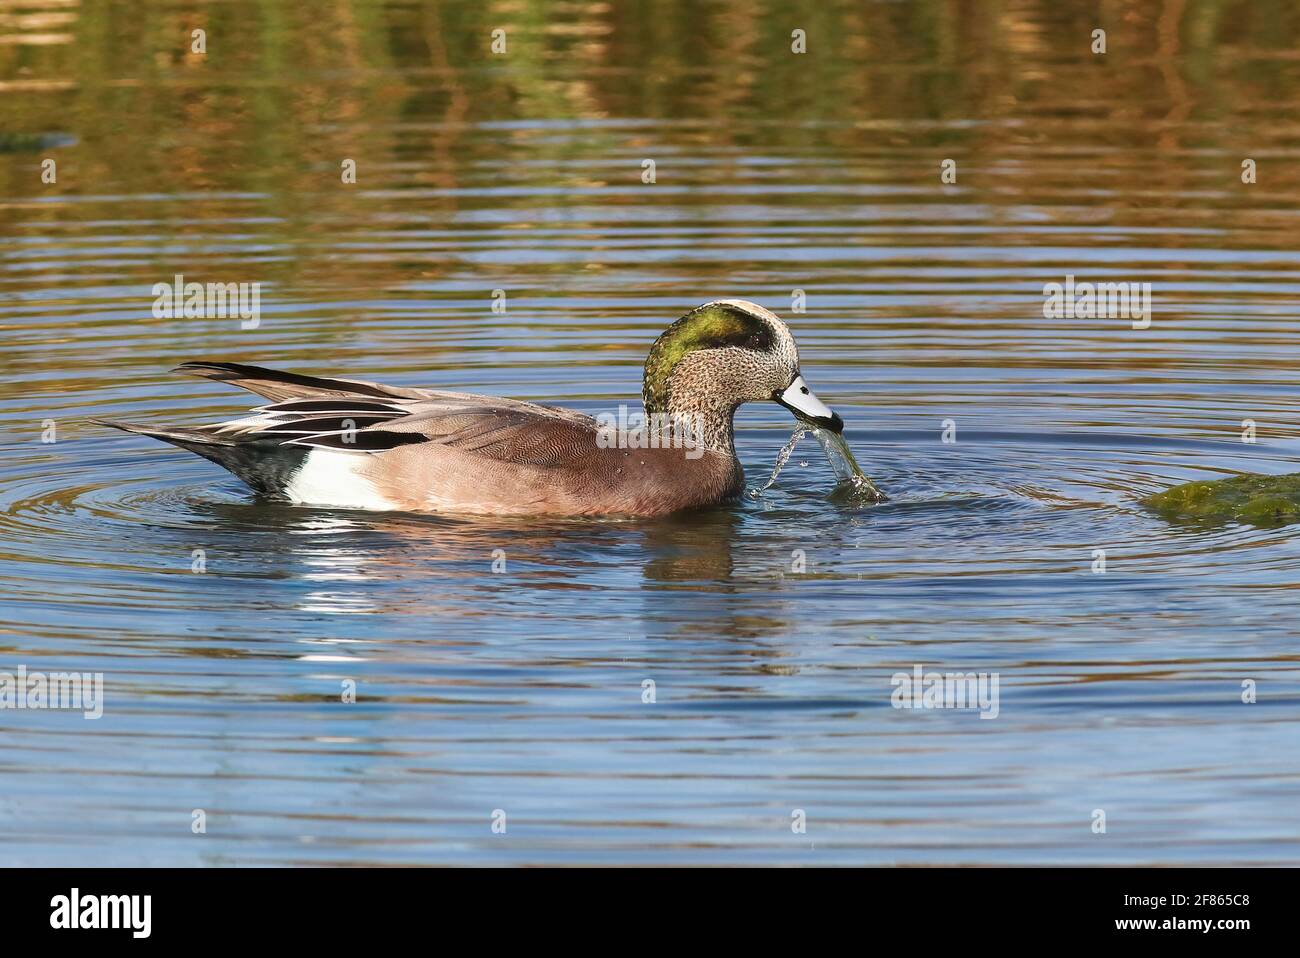 An American Wigeon duck, foraging in a pond, pulls aquatic plants out of the water to eat. Stock Photo